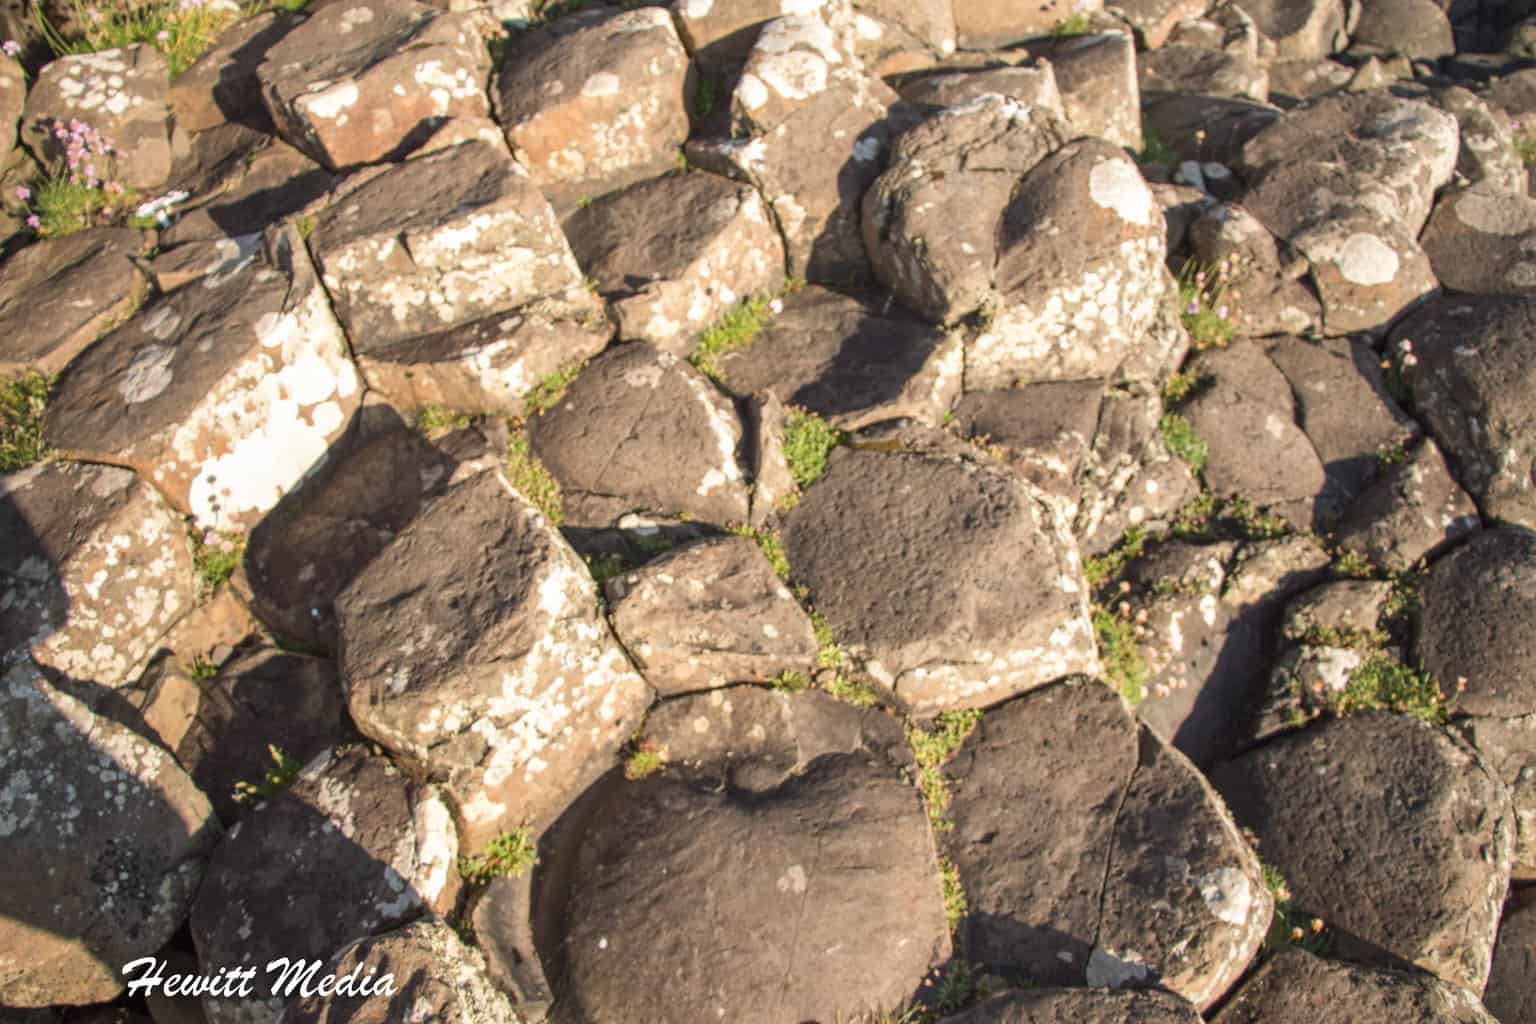 Giant's Causeway Visitor Guide